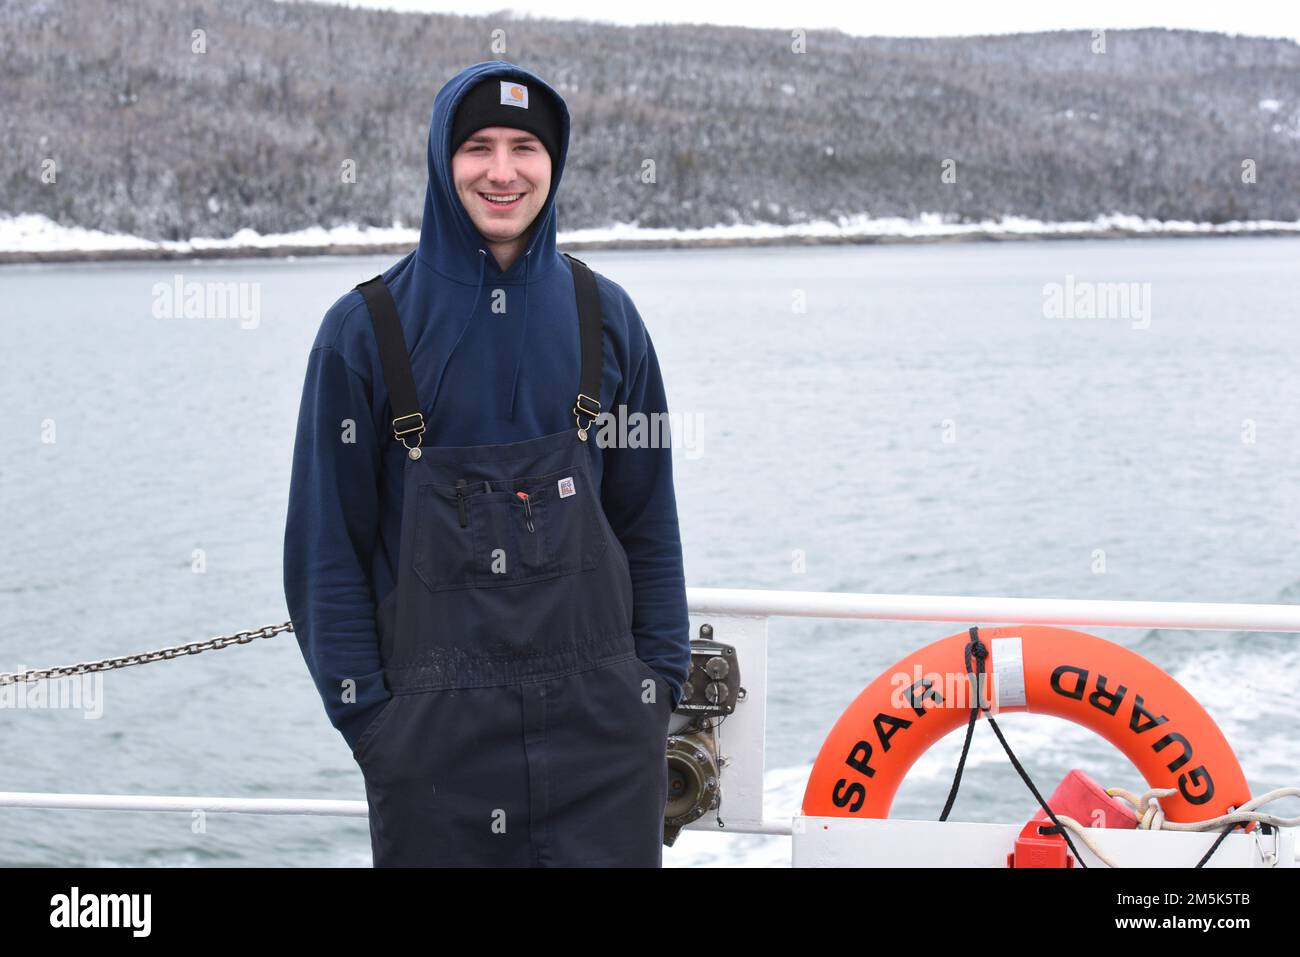 U.S. Coast Guard Petty Officer 3rd Class Michael Covey, a Machinery Technician aboard Cost Guard Cutter Spar, poses for a photo on the fantail while underway in the St. Lawrence River, March 21, 2022.Spar and her crew are traveling to Duluth, Minn. after a year-long maintenance period in Baltimore. Stock Photo